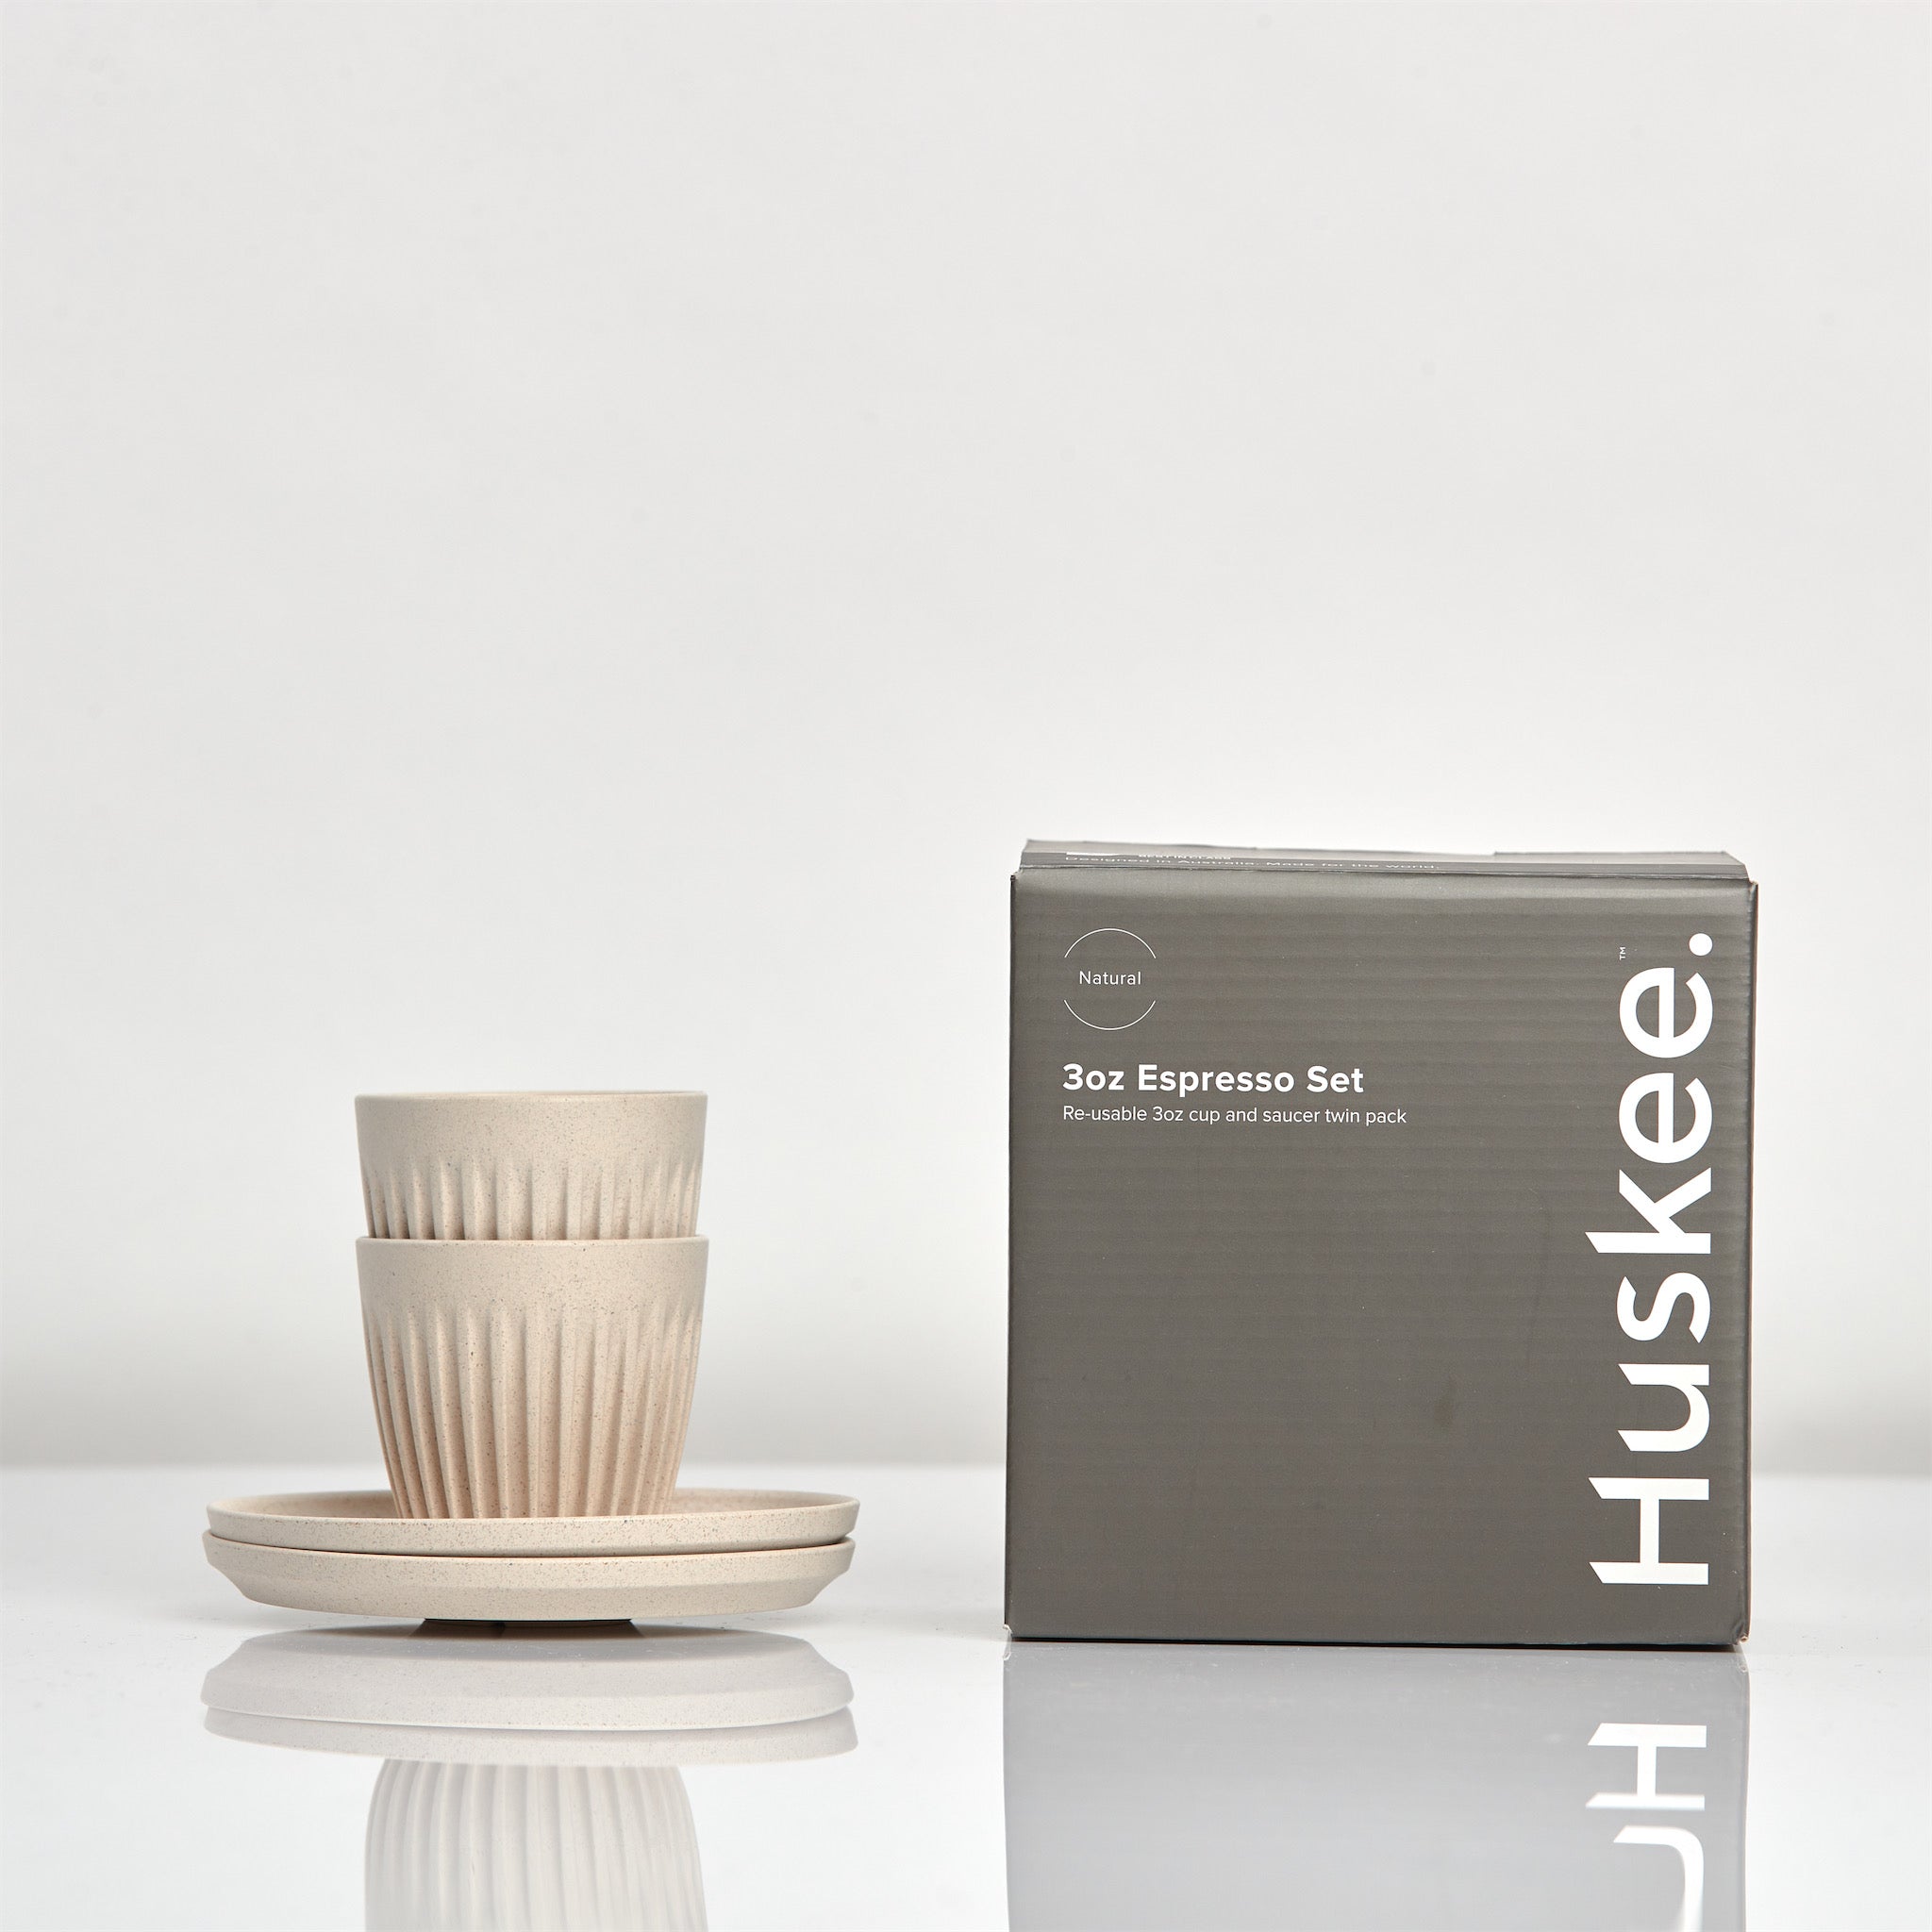 Huskee Cup - 3oz Natural Set of 2